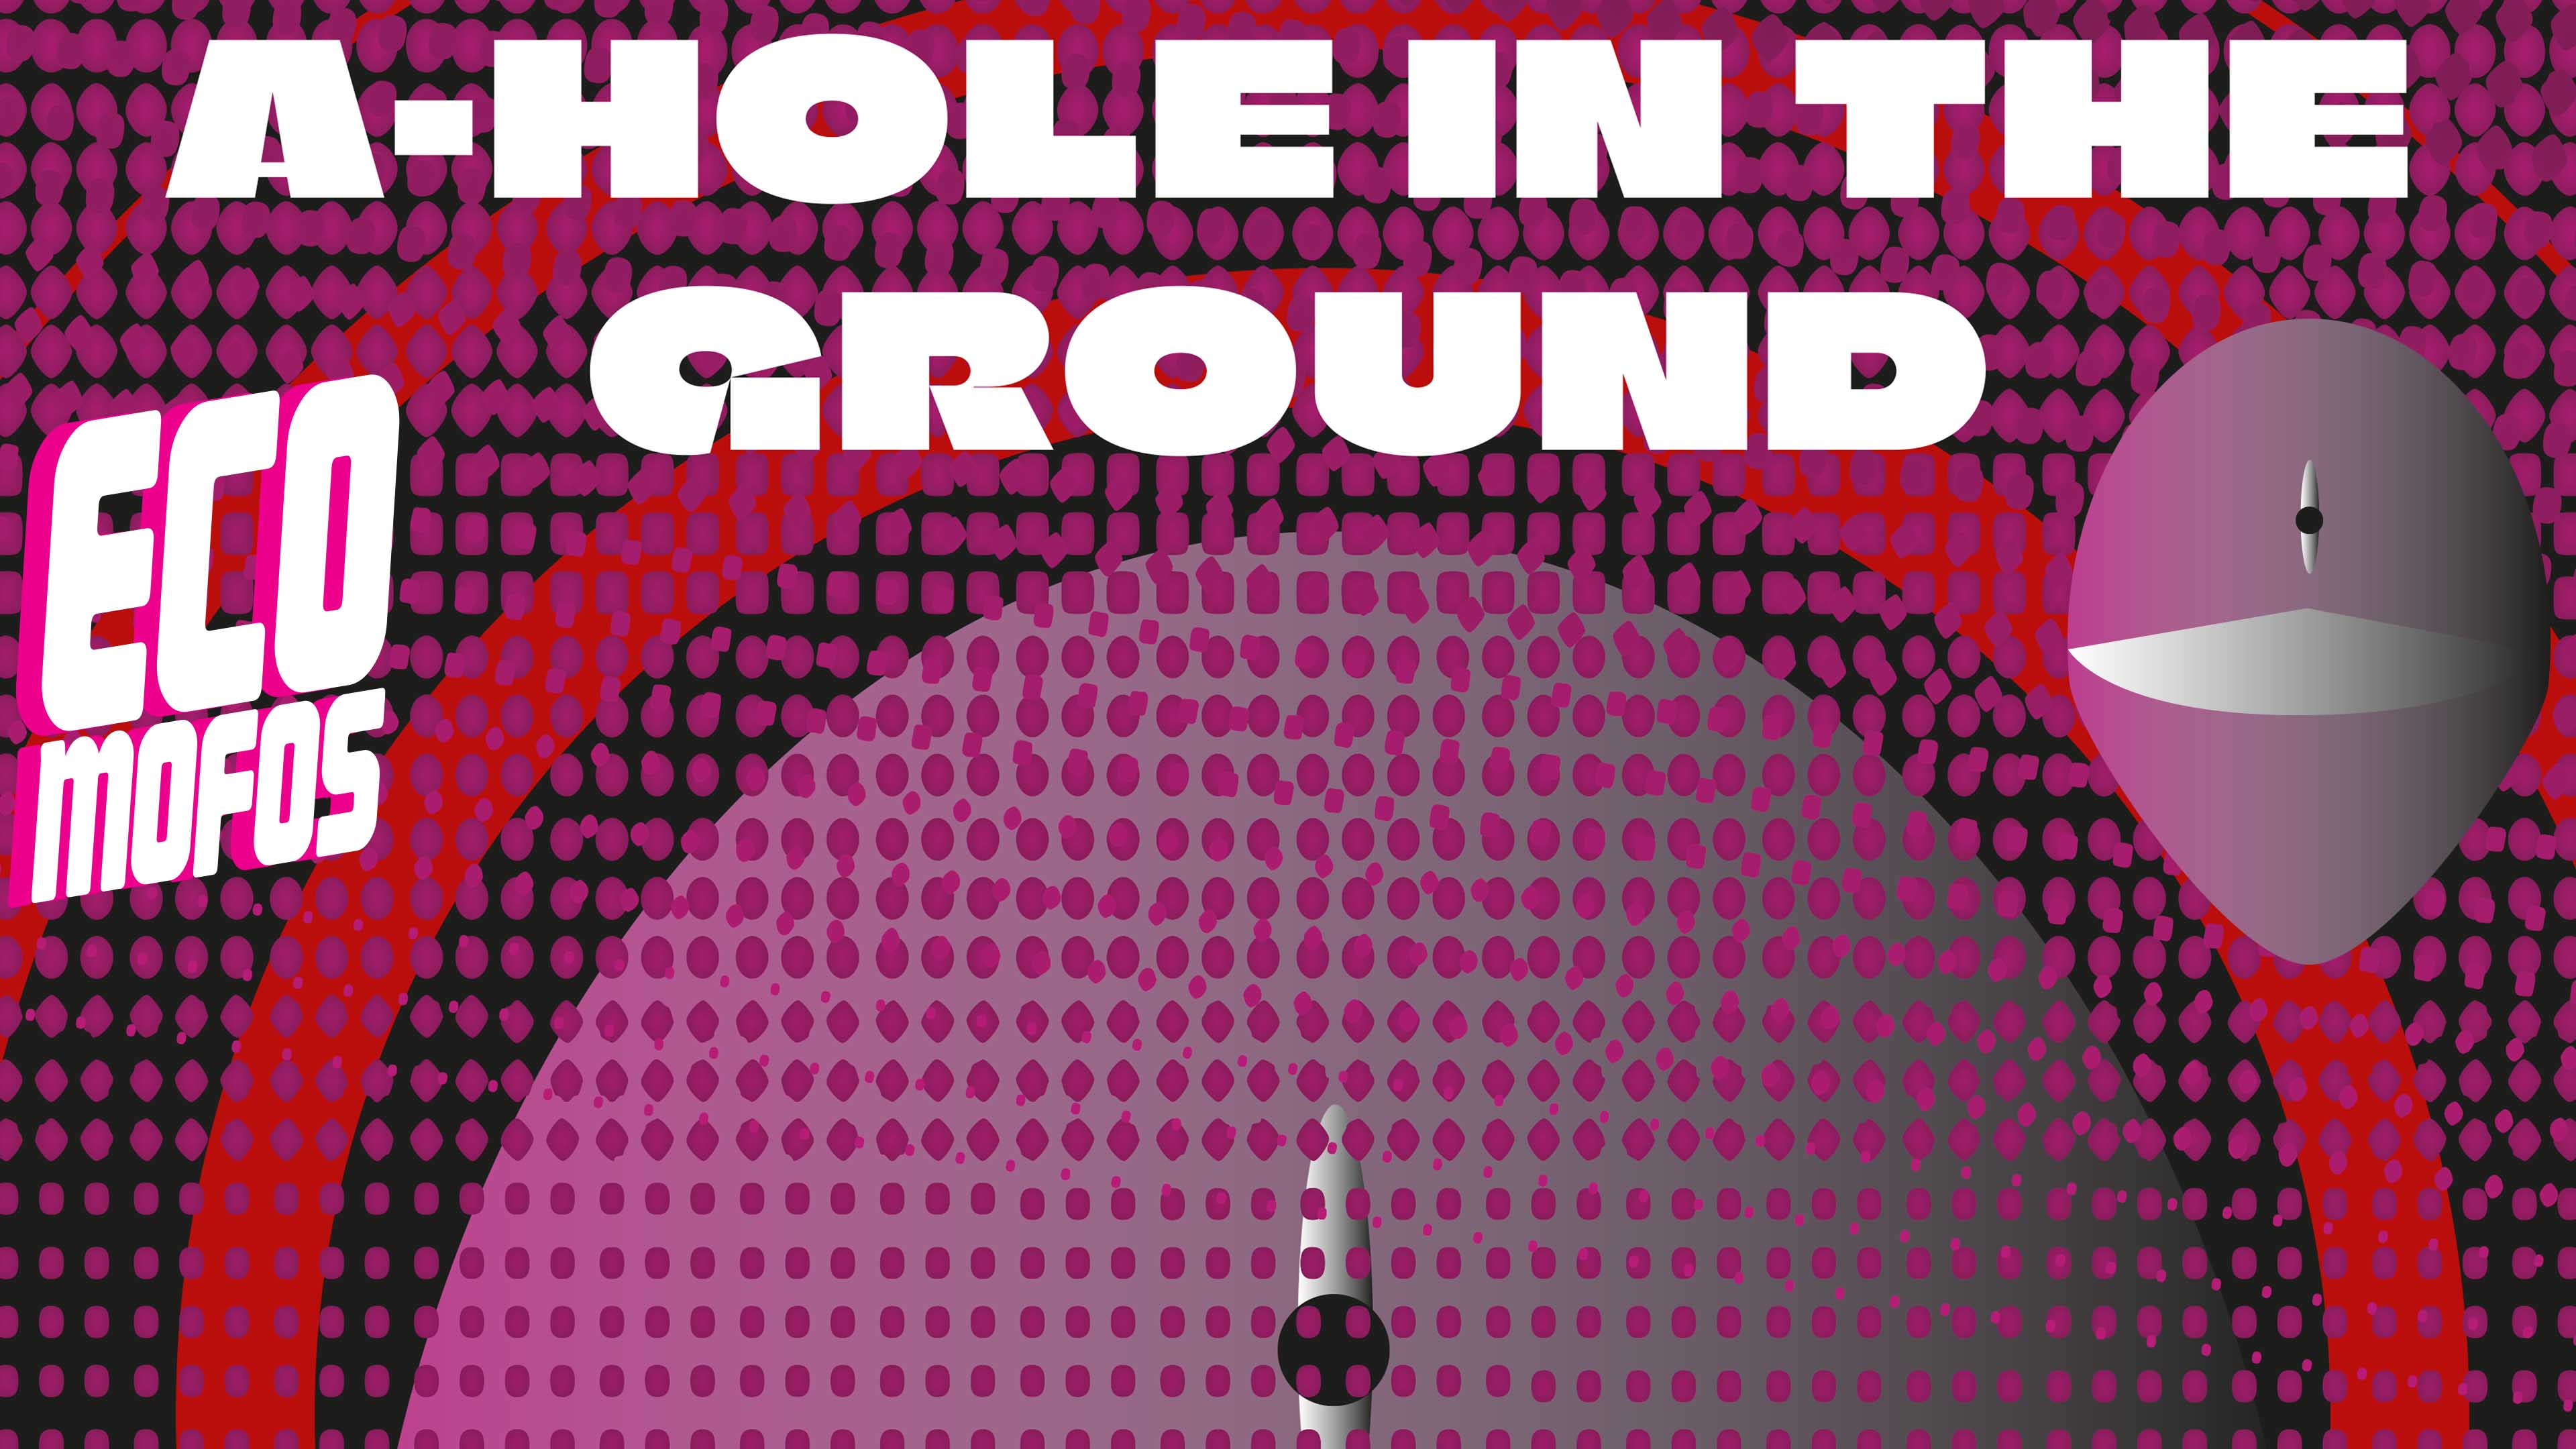 A-HOLE IN THE GROUND